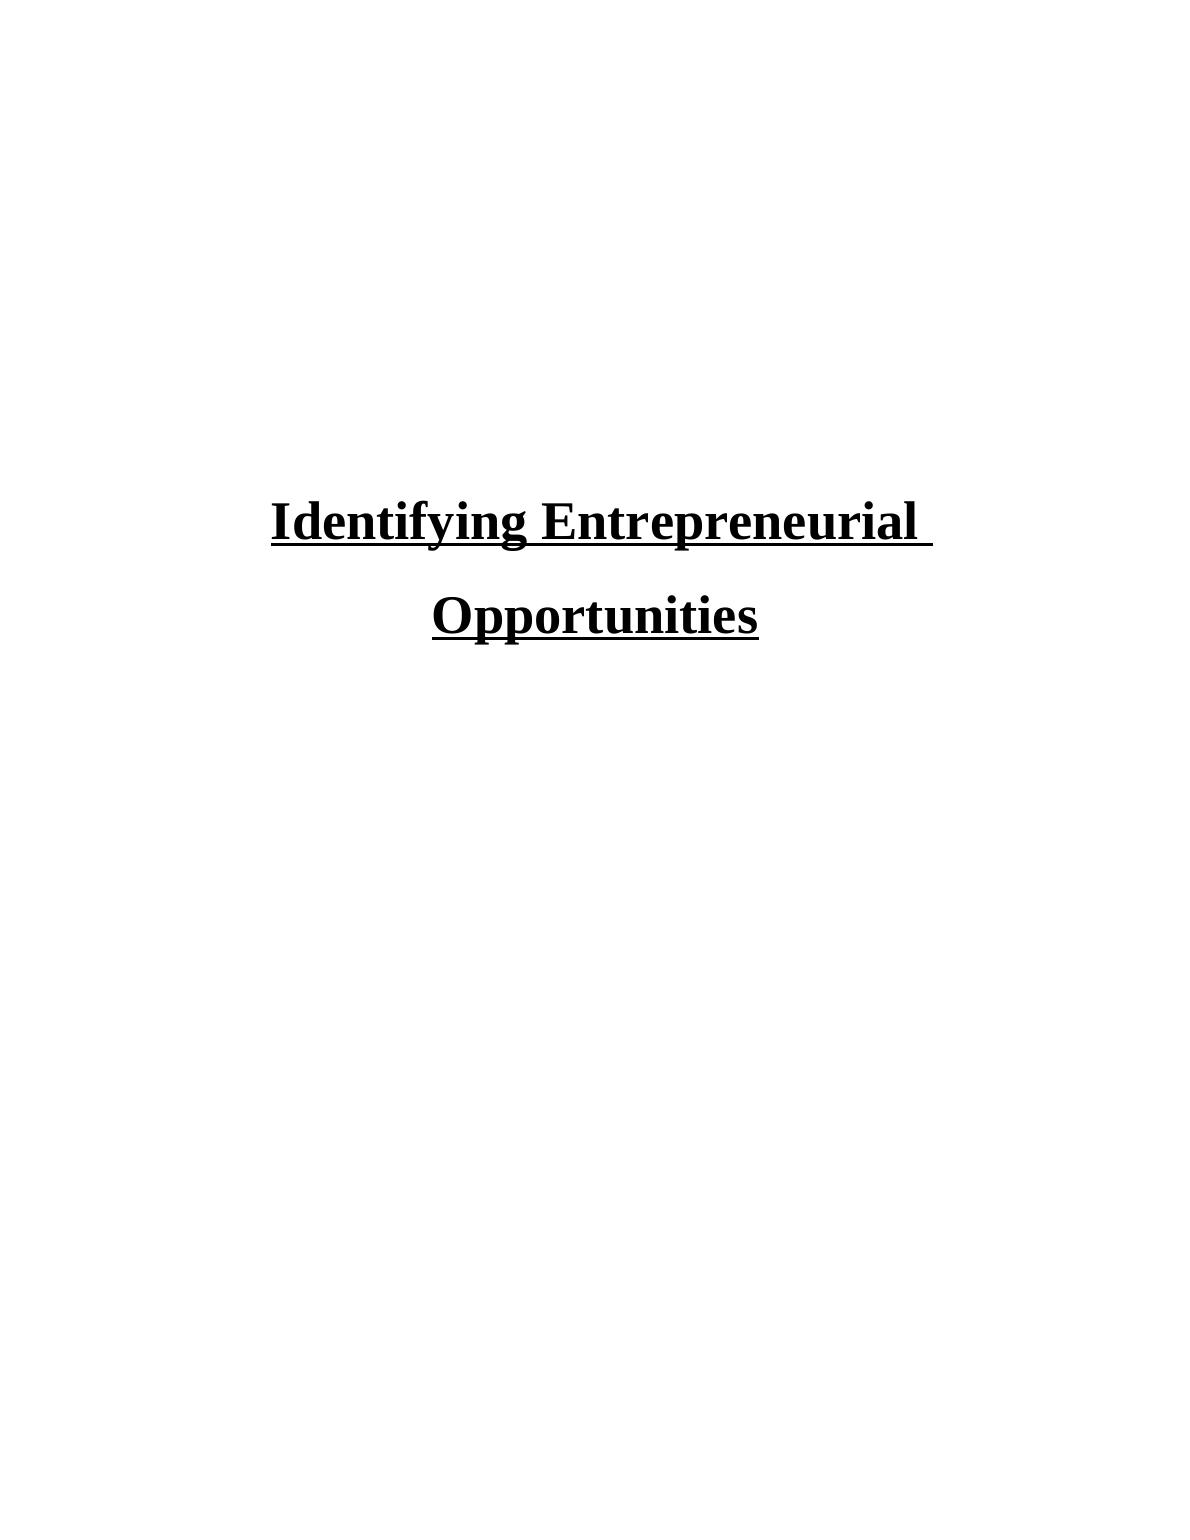 Report on Identifying Entrepreneurial Opportunities - Natural Essence_1